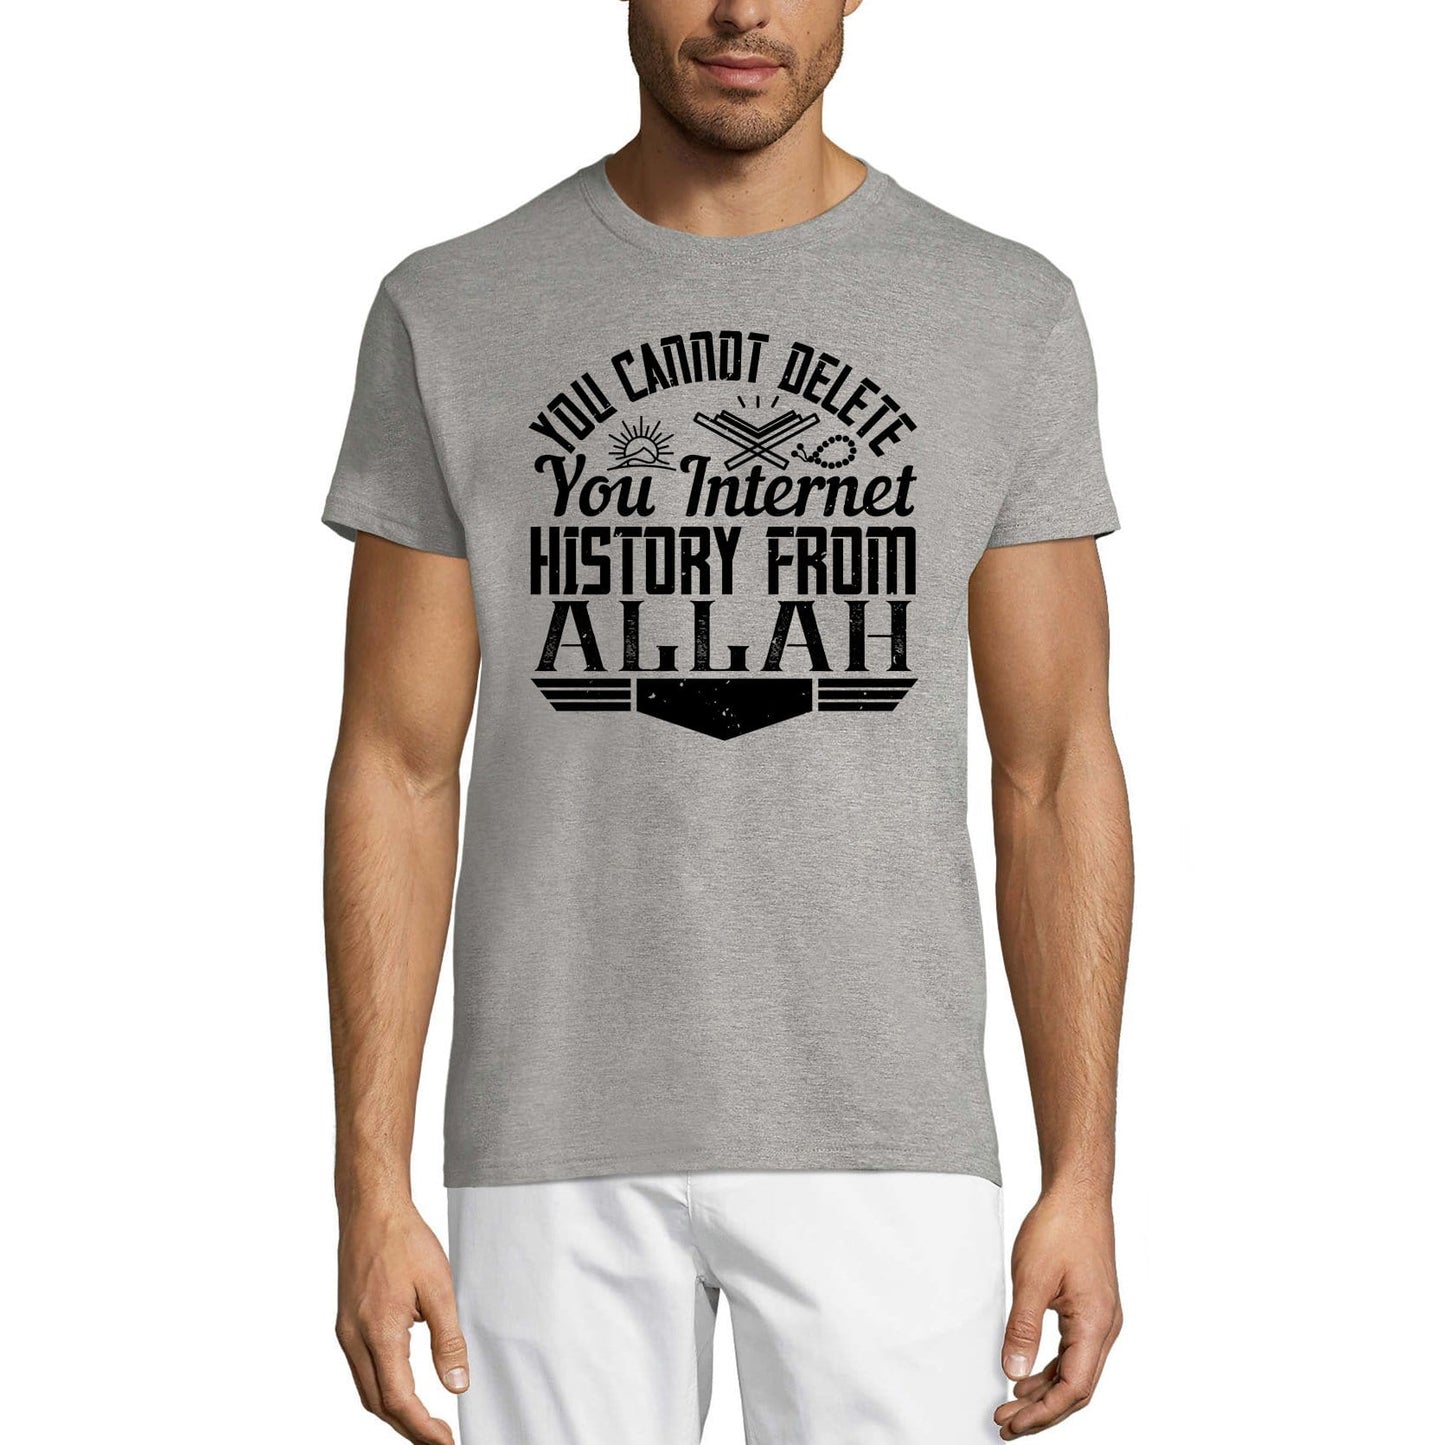 ULTRABASIC Men's T-Shirt You Cannot Delete You Internet History from Allah